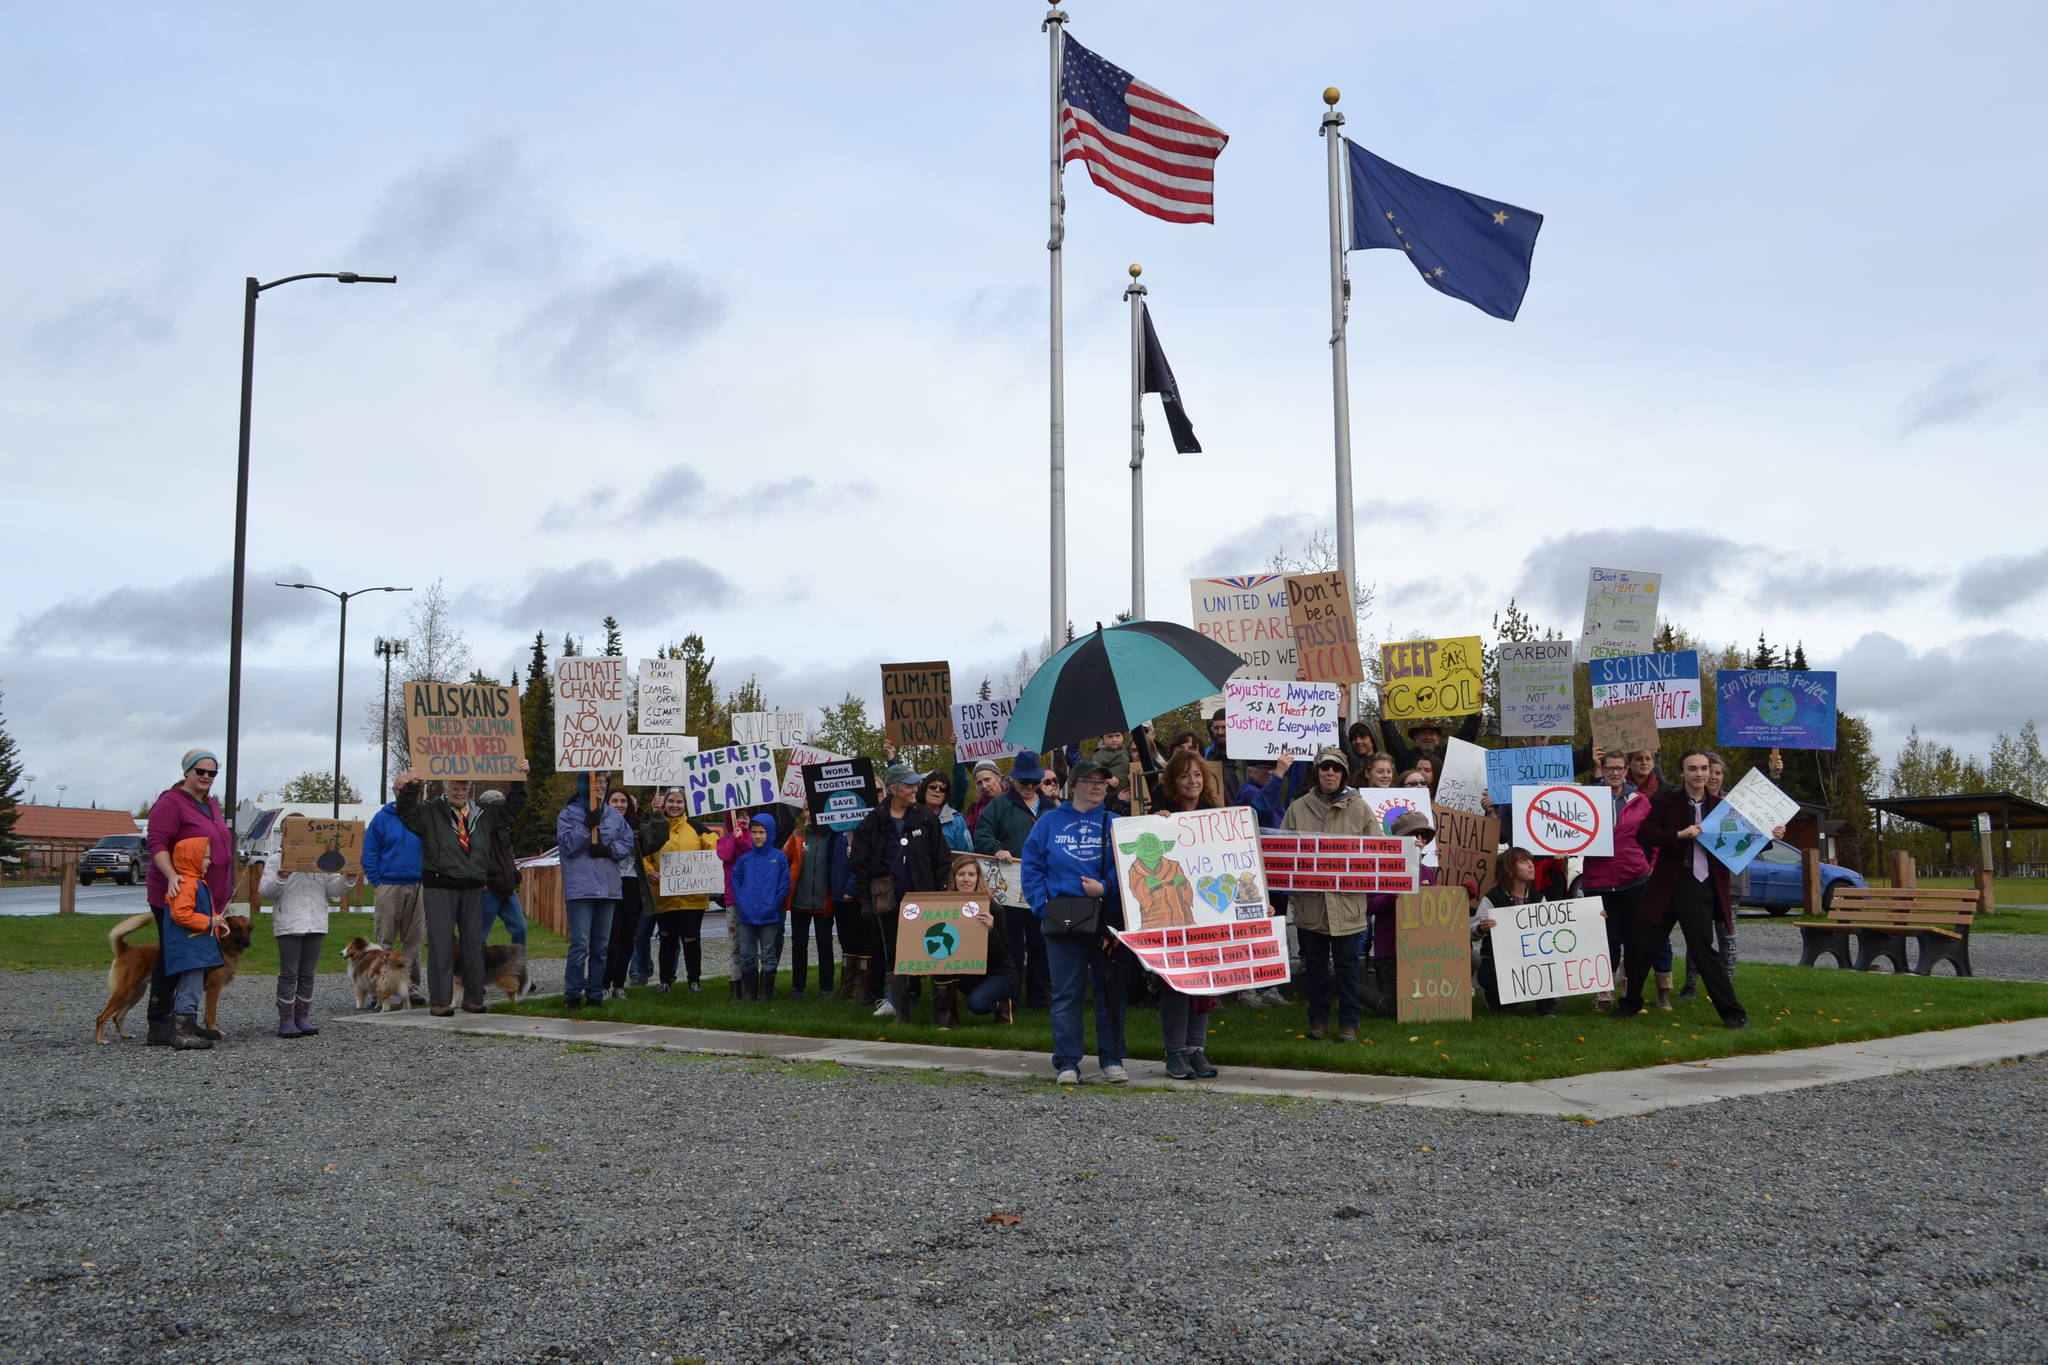 Marchers in the Soldotna Climate Strike stop for a group photo in Soldotna Creek Park on Sept. 20, 2019. (Photo by Brian Mazurek/Peninsula Clarion)